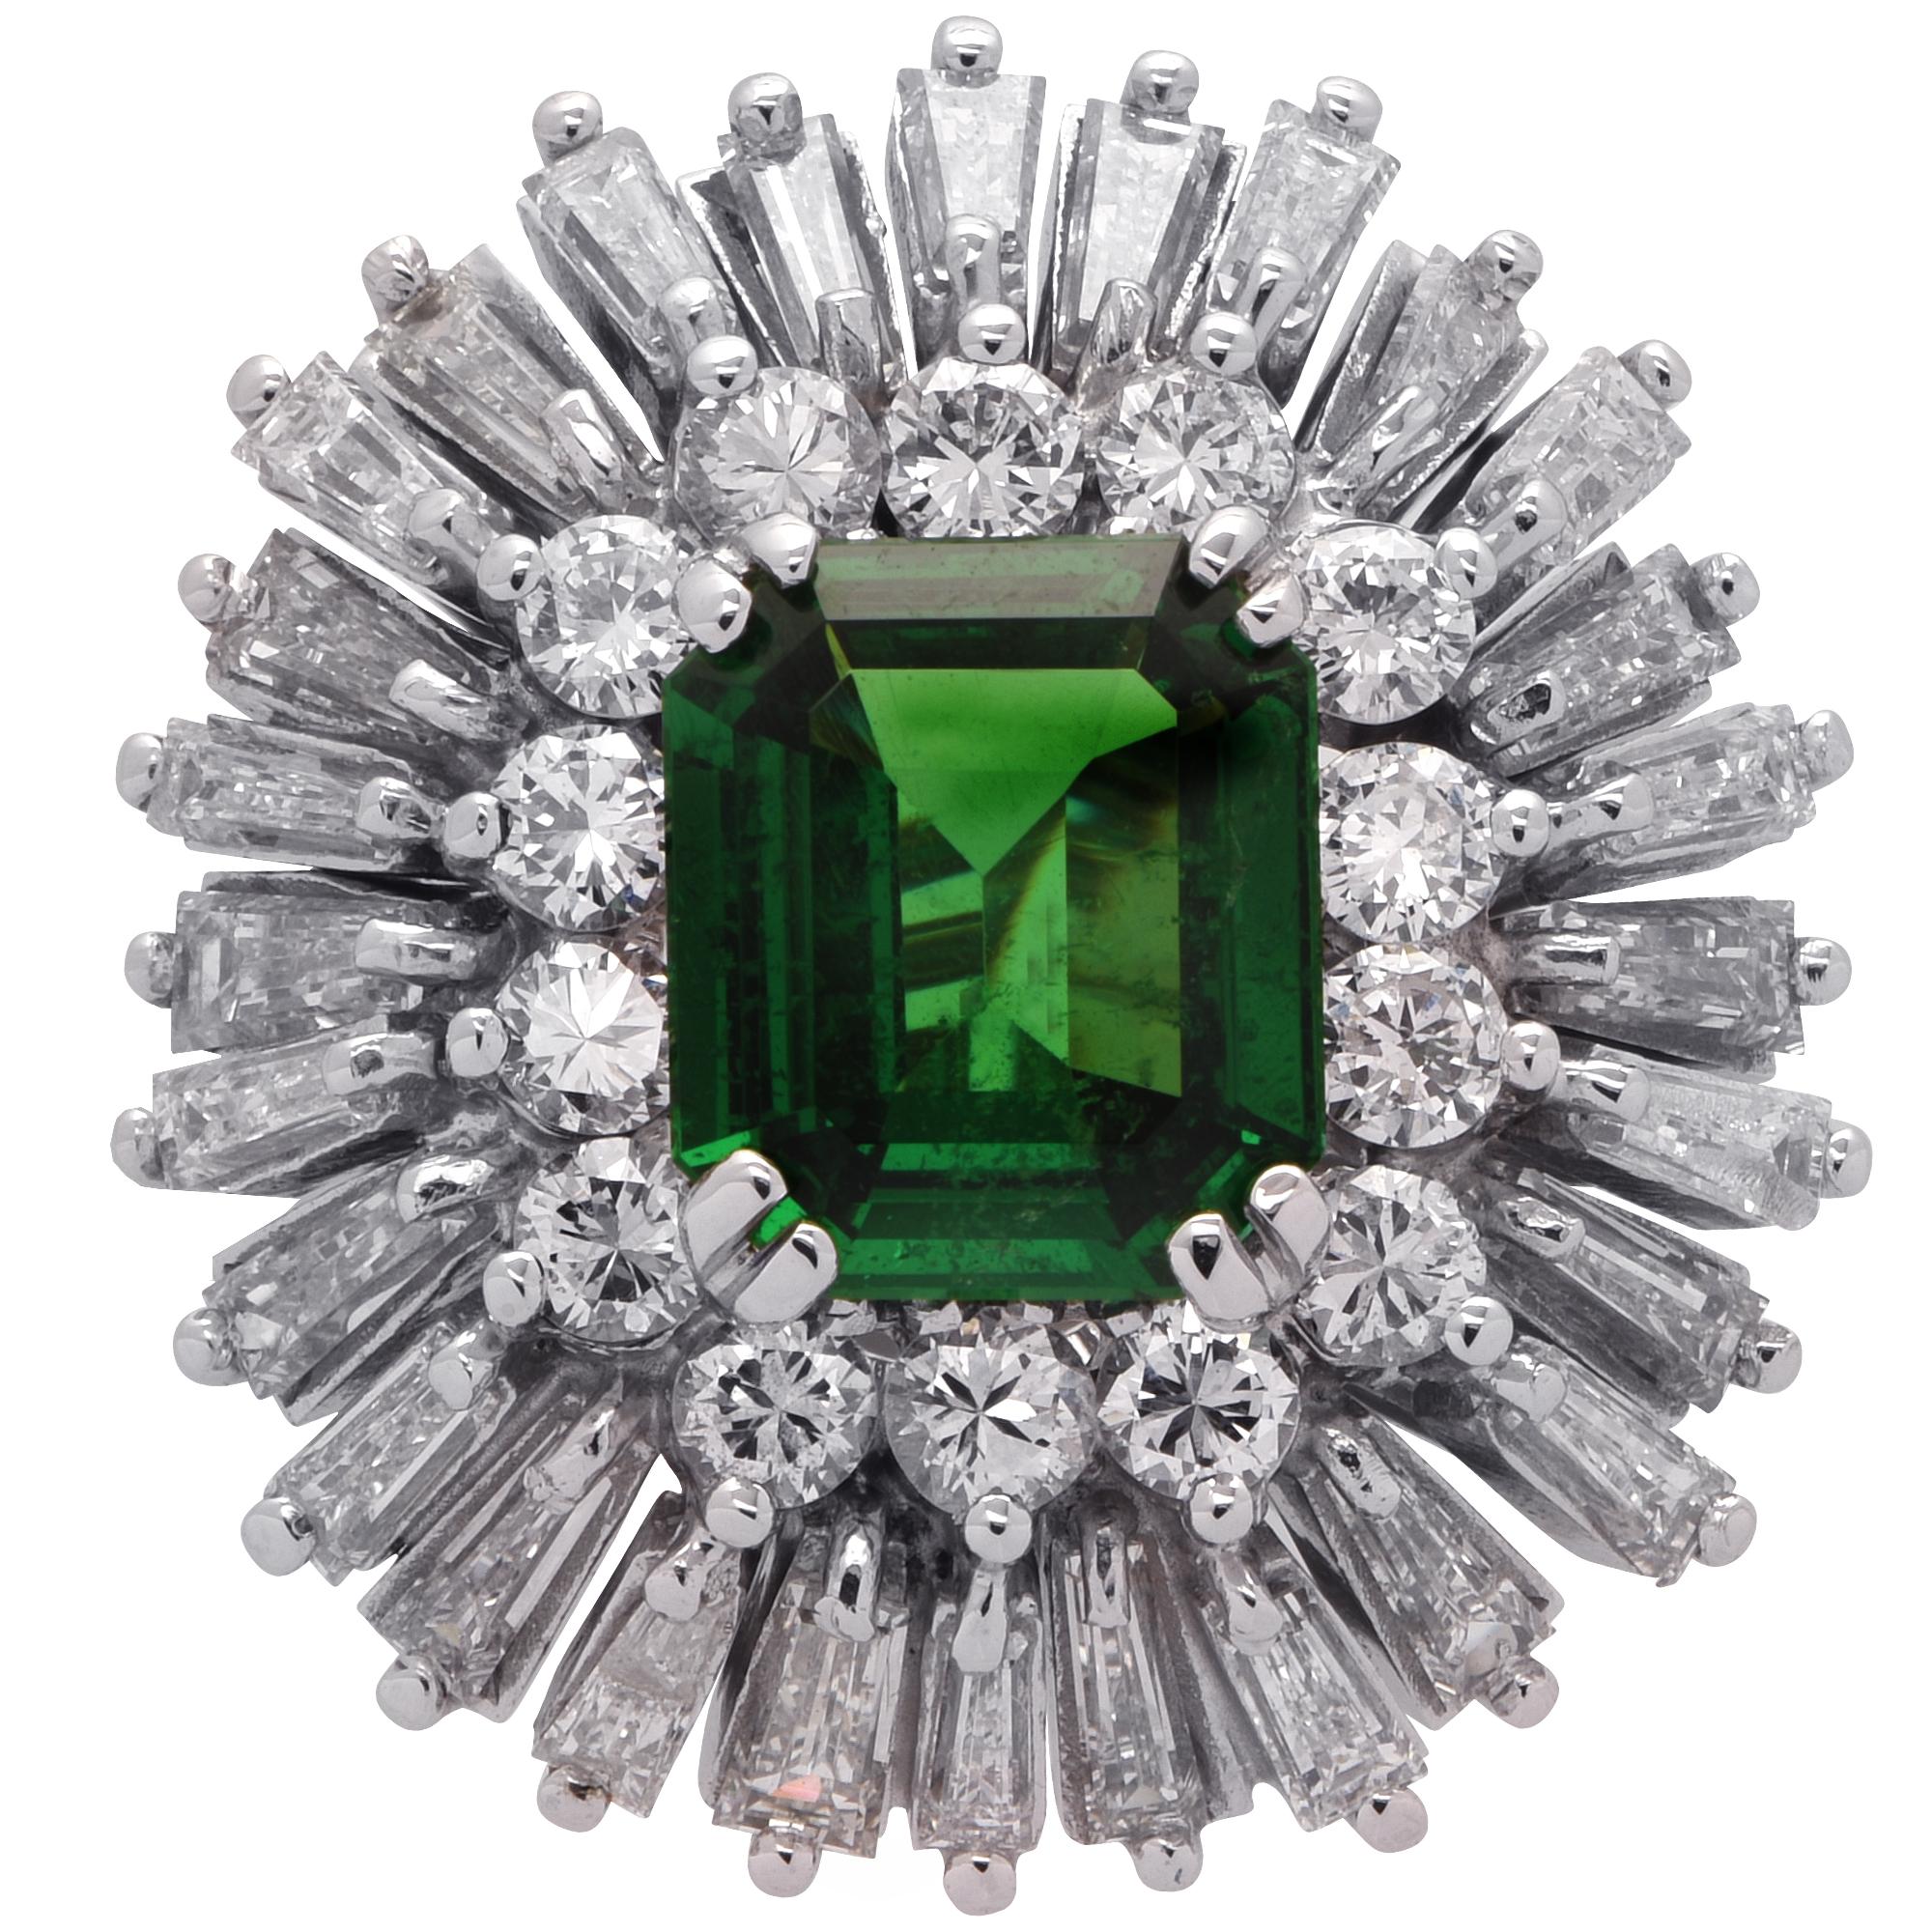 Striking Tsavorite and Garnet ring crafted in 18 karat white gold, featuring an emerald cut Tsavorite Garnet weighing approximately 2.25 carats, accented by 4.17 carats of round brilliant and baguette cut diamonds, G color VS-SI clarity. The vivid